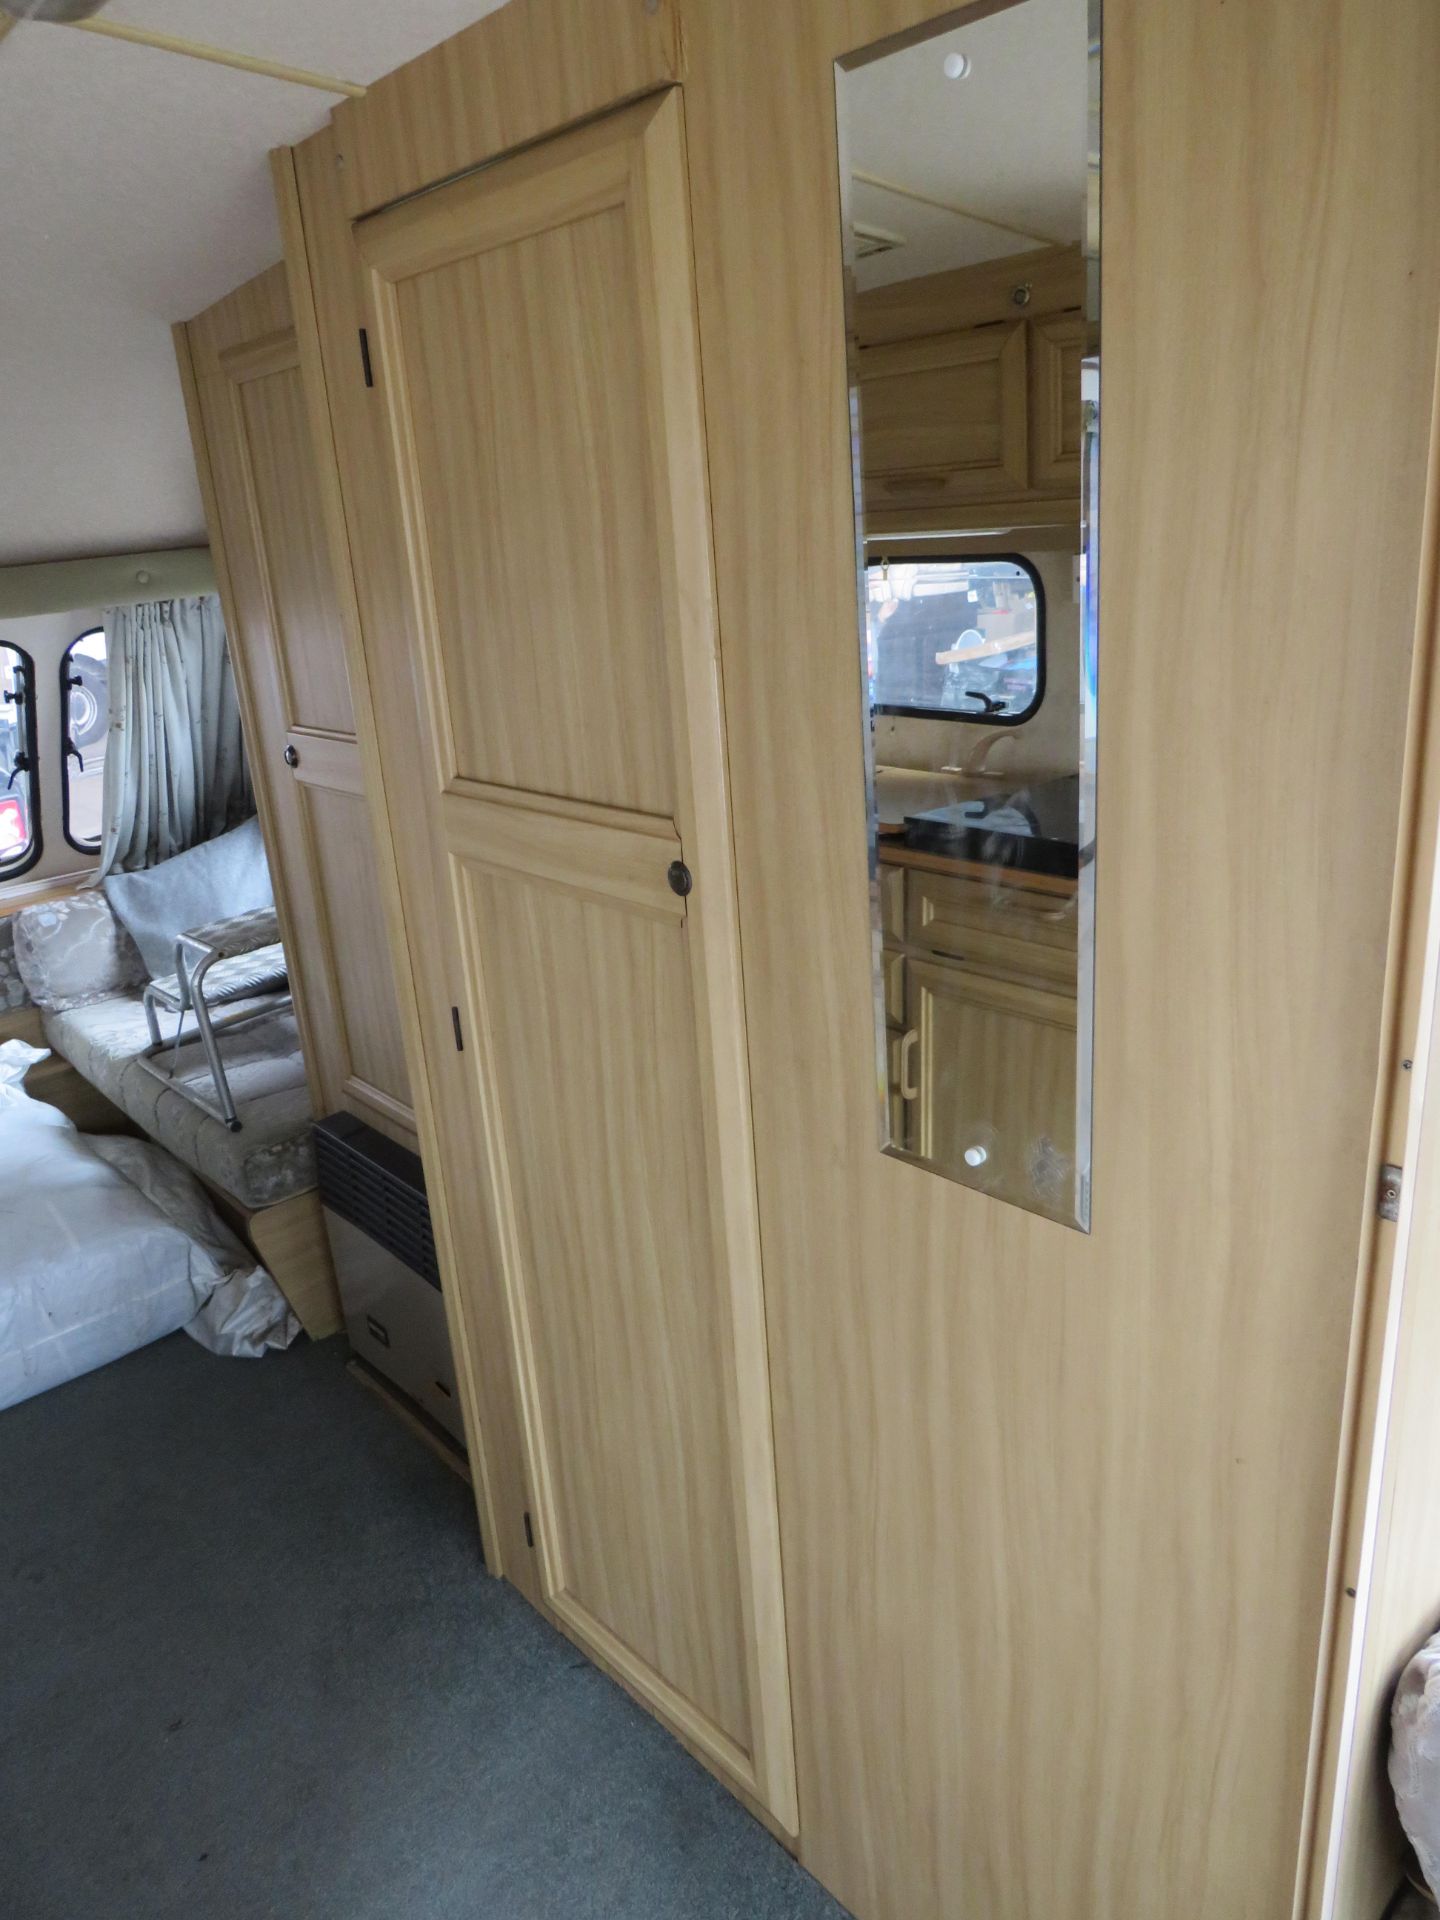 Eldis Pamperos XL 4 berth Caravan with self mover and Awning, the seller has informed us that the - Image 11 of 19